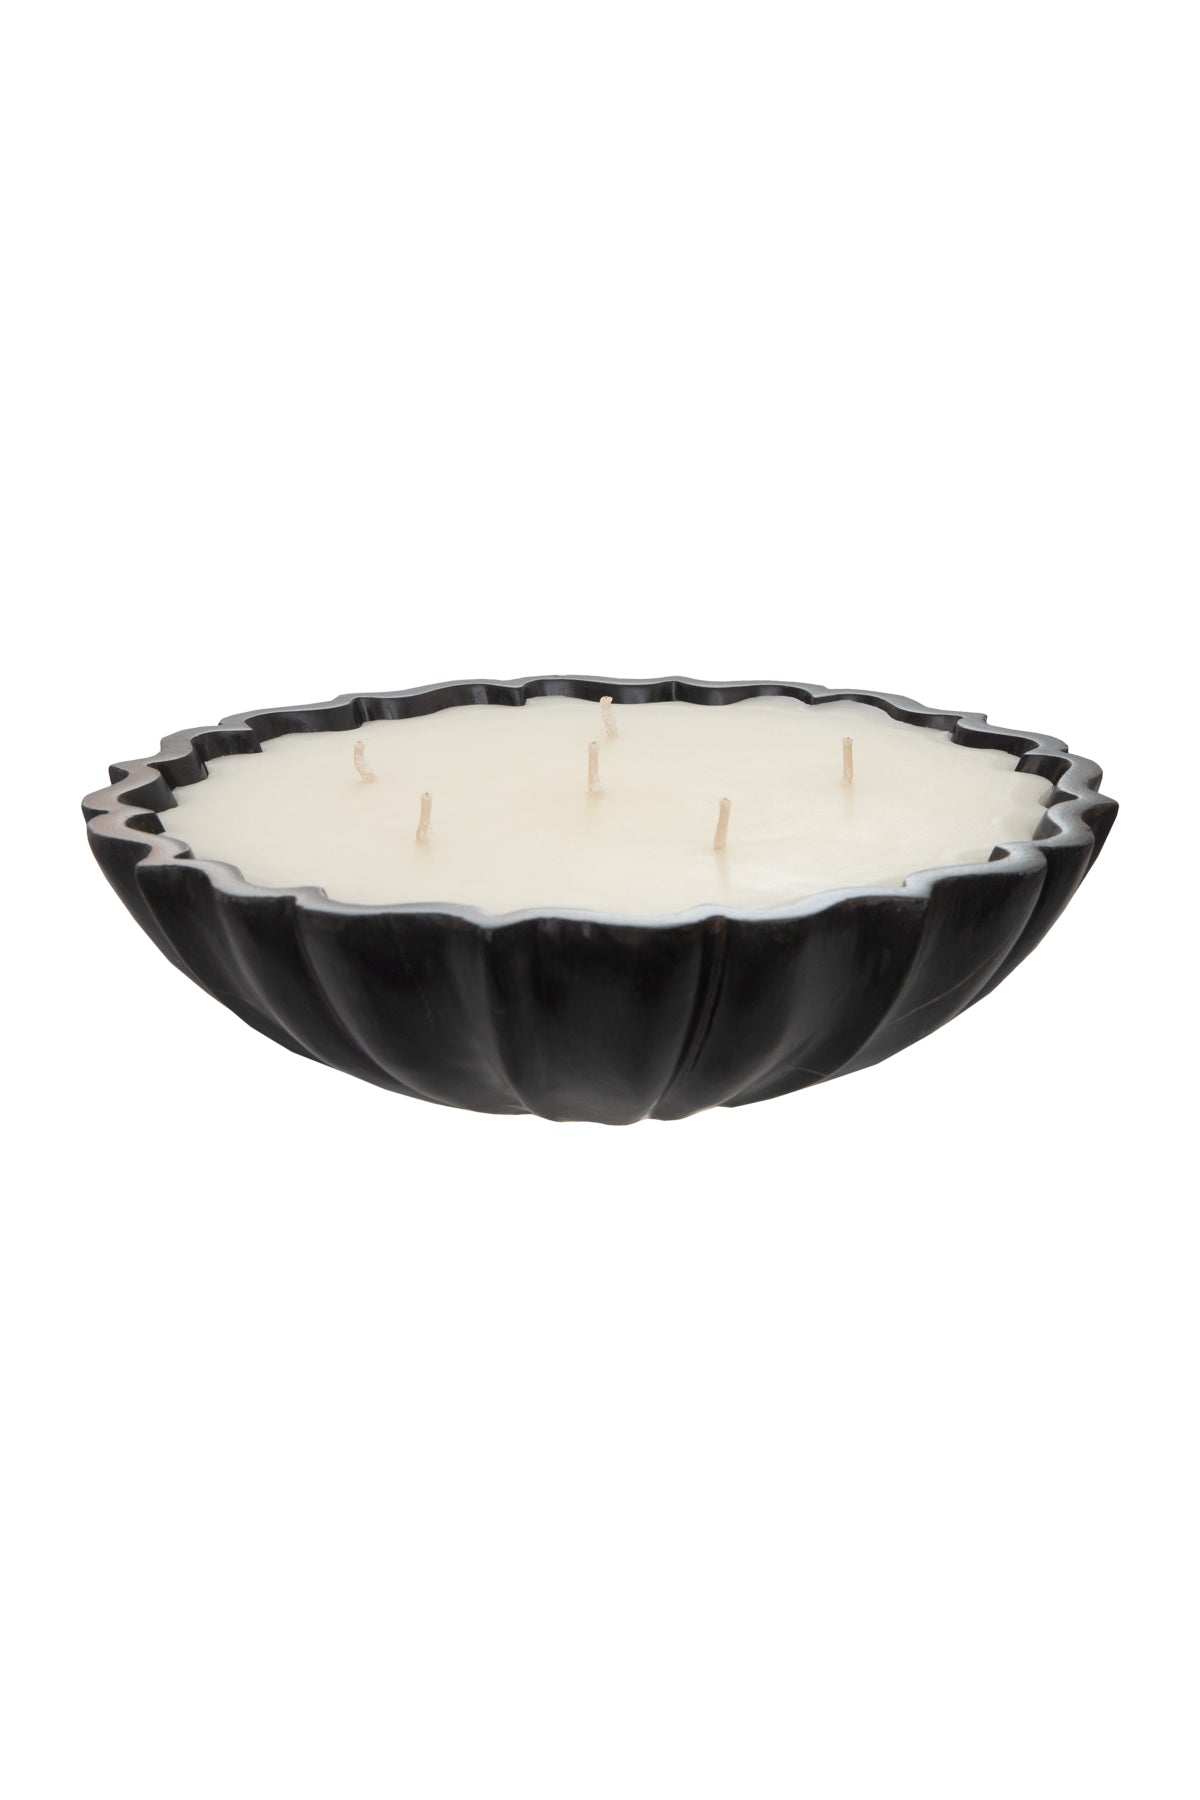 Lotus Marble Bowl with Candle